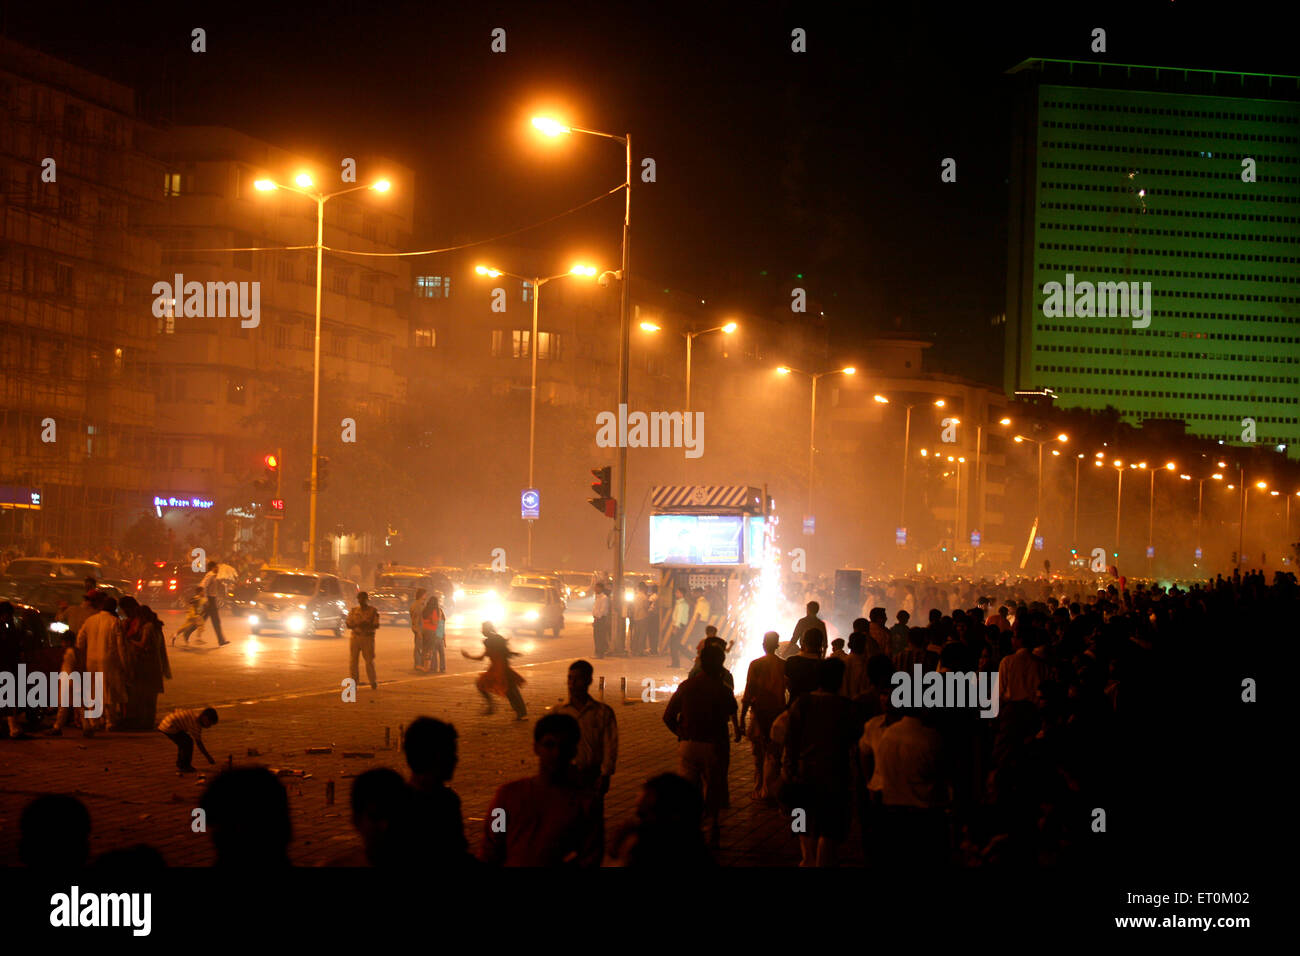 People celebrating Diwali Deepawali ; festival of lights by bursting fire crackers at Marine drive in Bombay Stock Photo